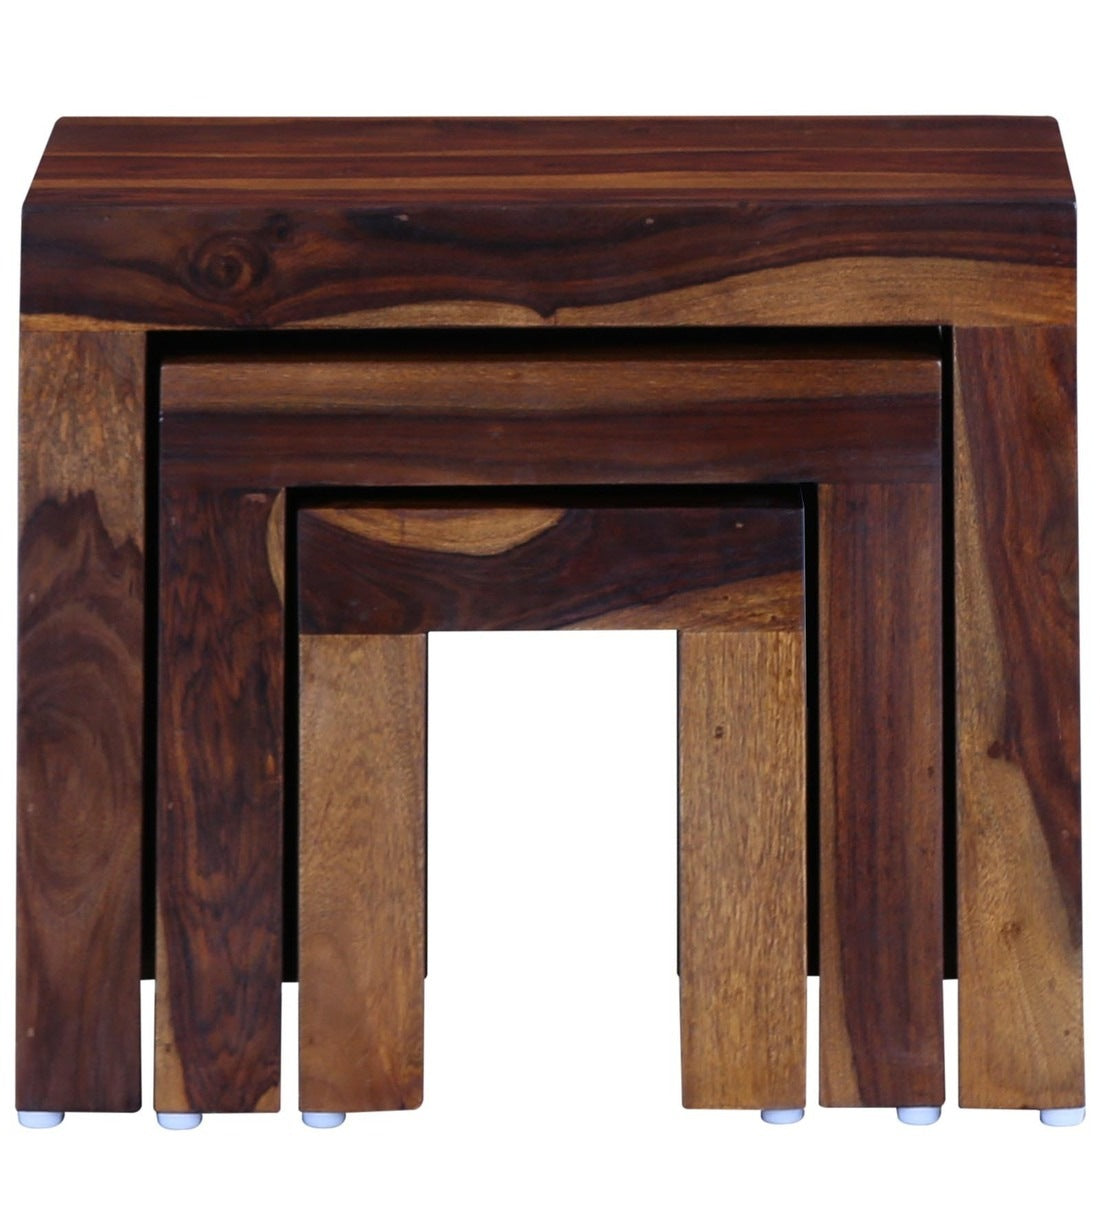 Acro Solid Wood Nest of Tables for Living Room - Rajwada Furnish